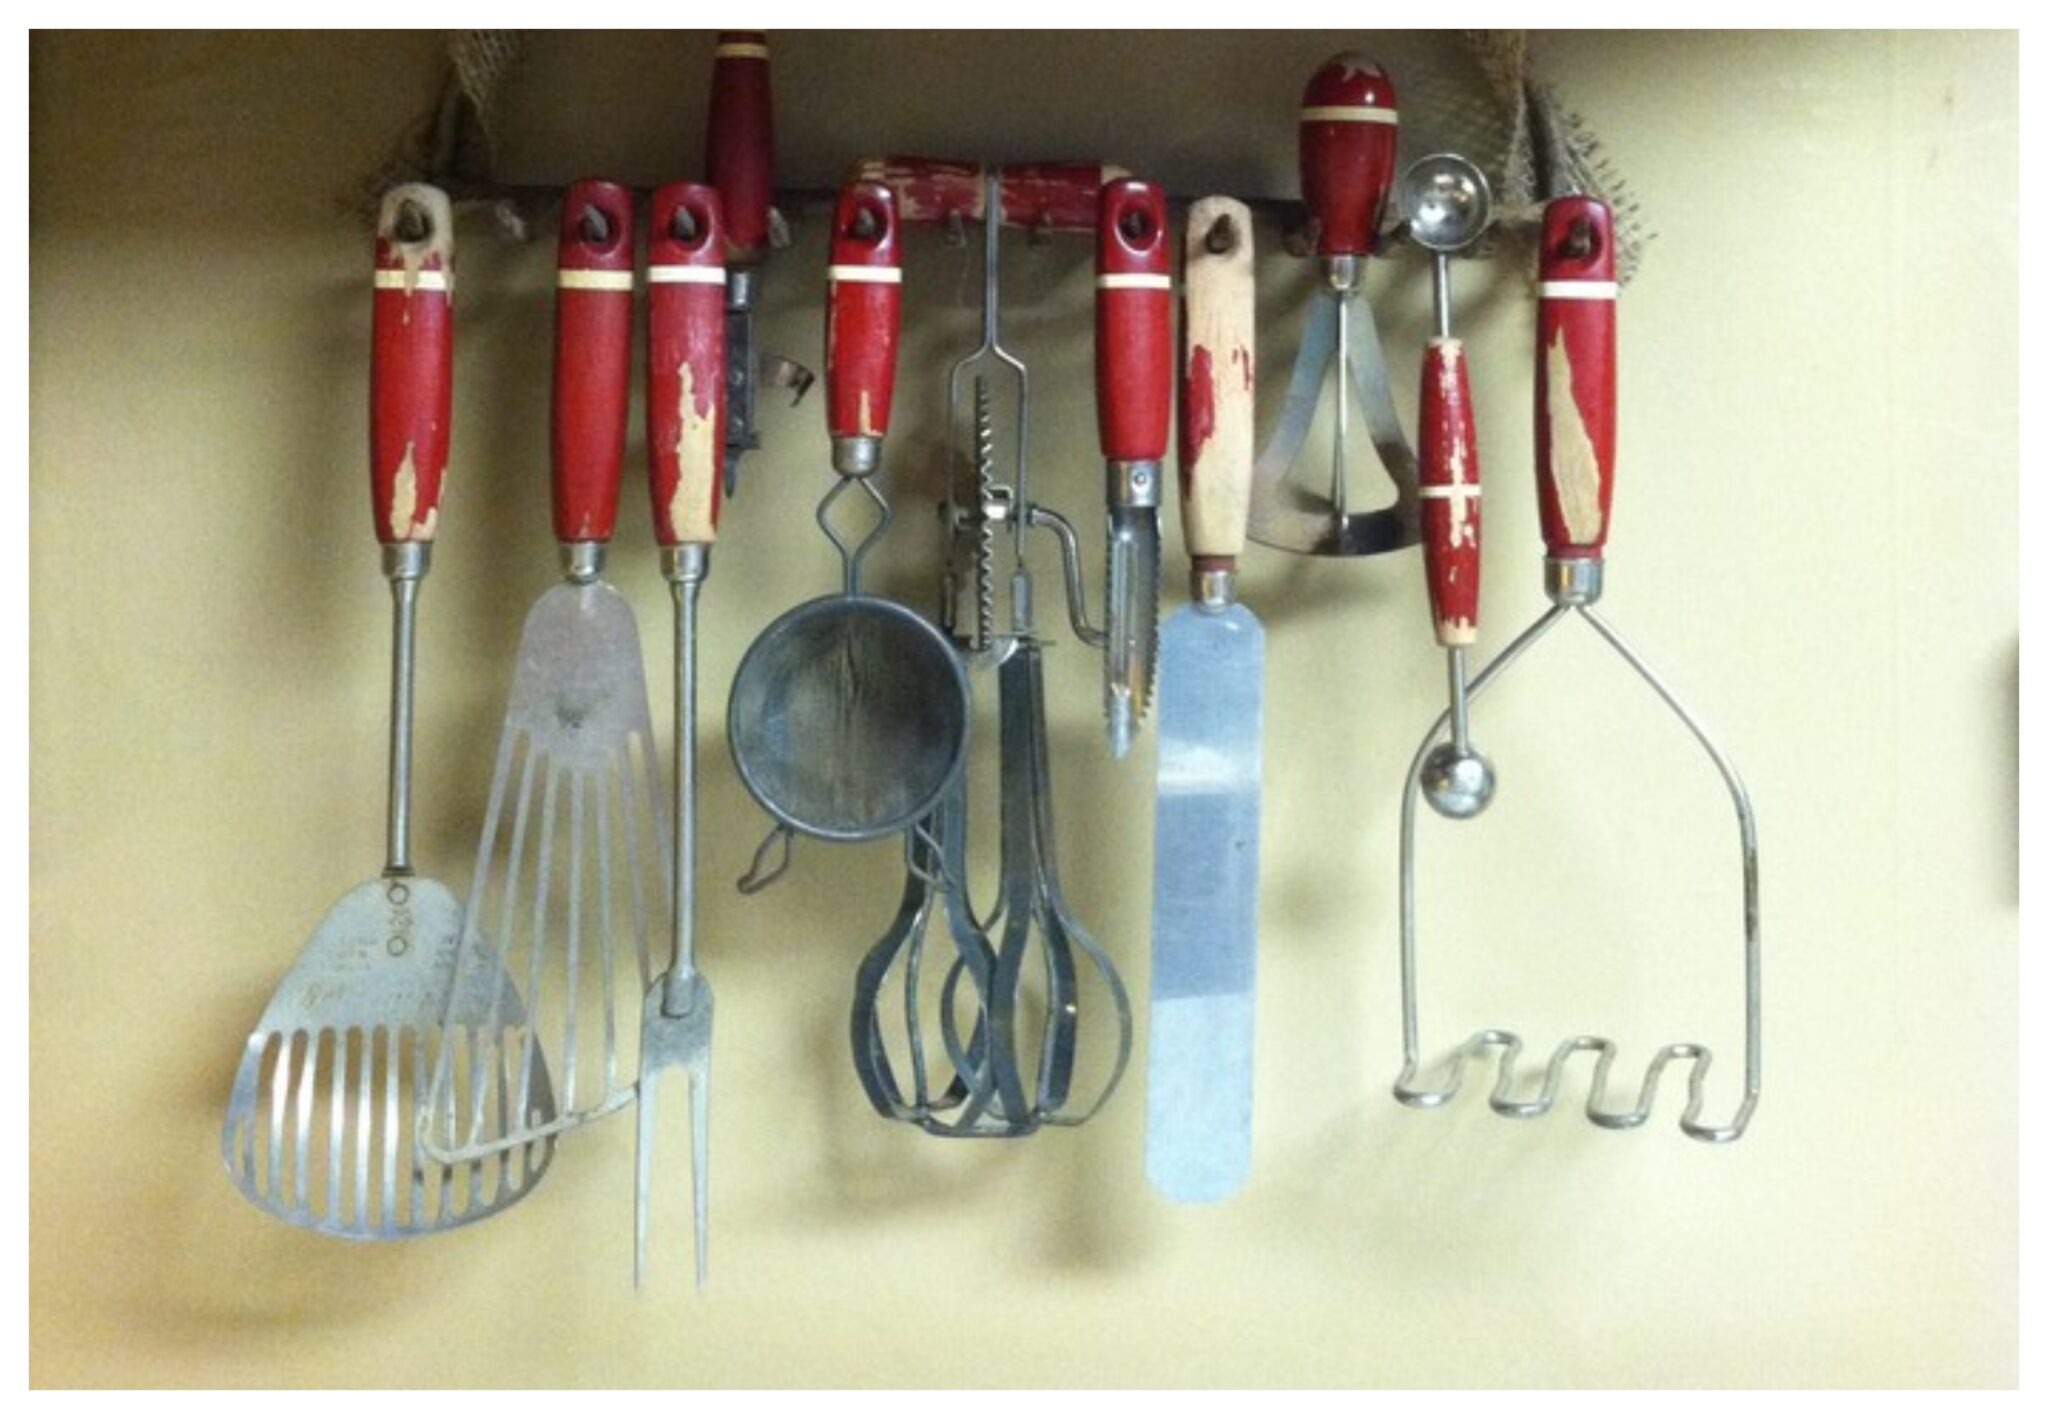 How to store your kitchen utensils…